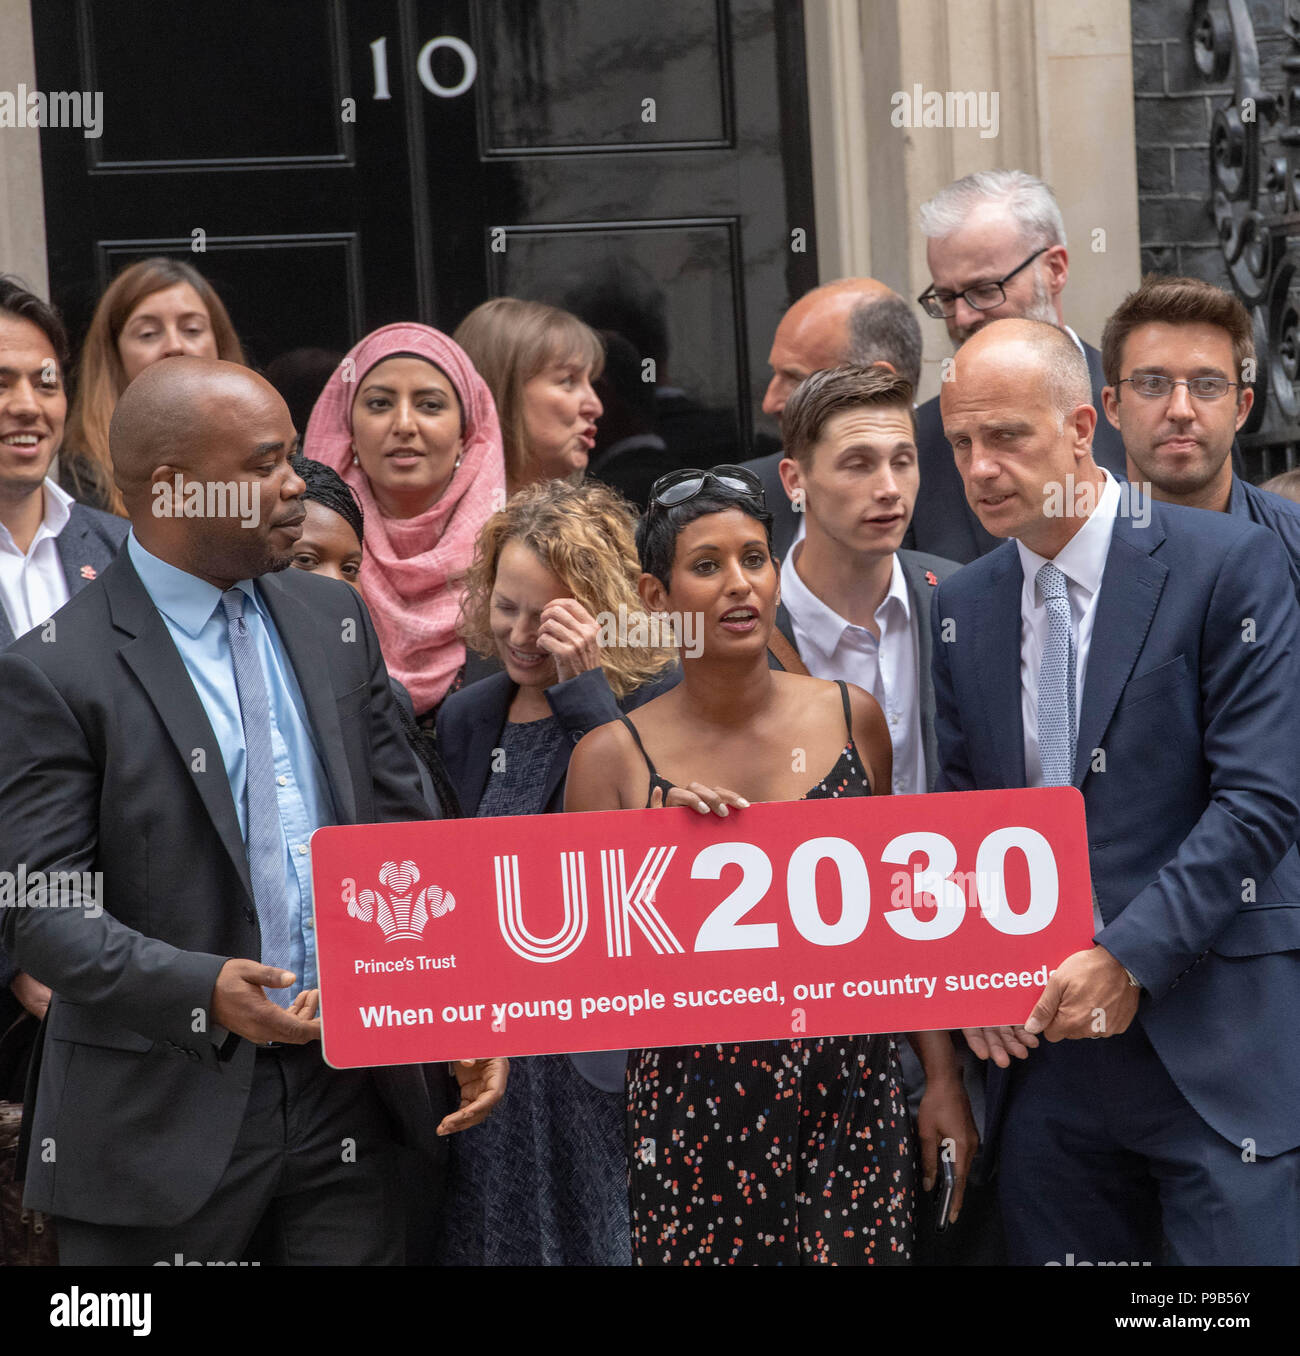 Downing Street,London 17th July 2018 Members of the Princes Trust uk2030 Youth Taskforce launches their initiative at 10 Downing Street including Chairperson Naga Munchetty BBC News presenter, Chair of the taskforce Credit: Ian Davidson/Alamy Live News Stock Photo